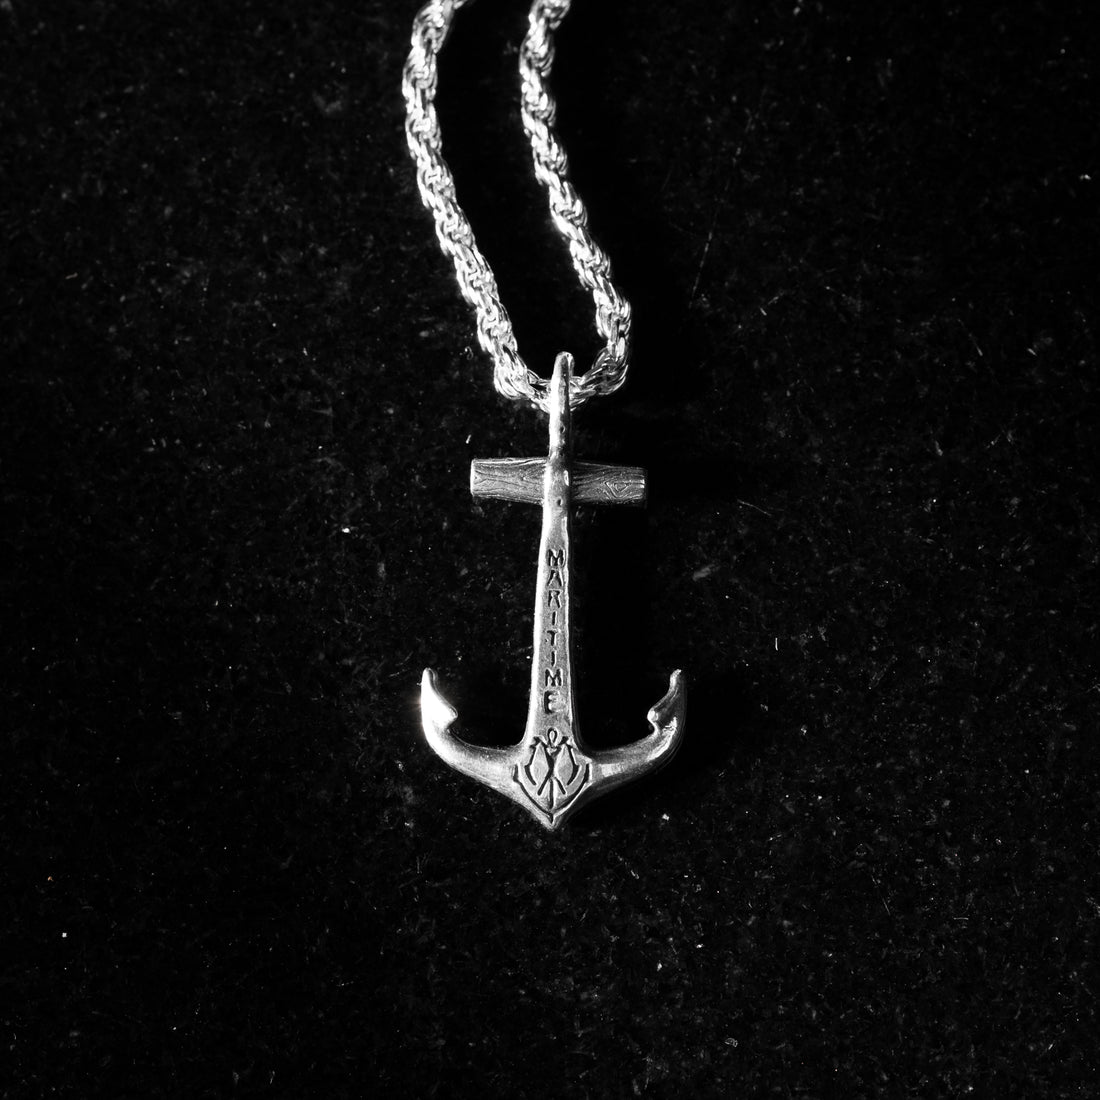 Sterling Silver Mini Anchor Necklace - Custom Stamp Option